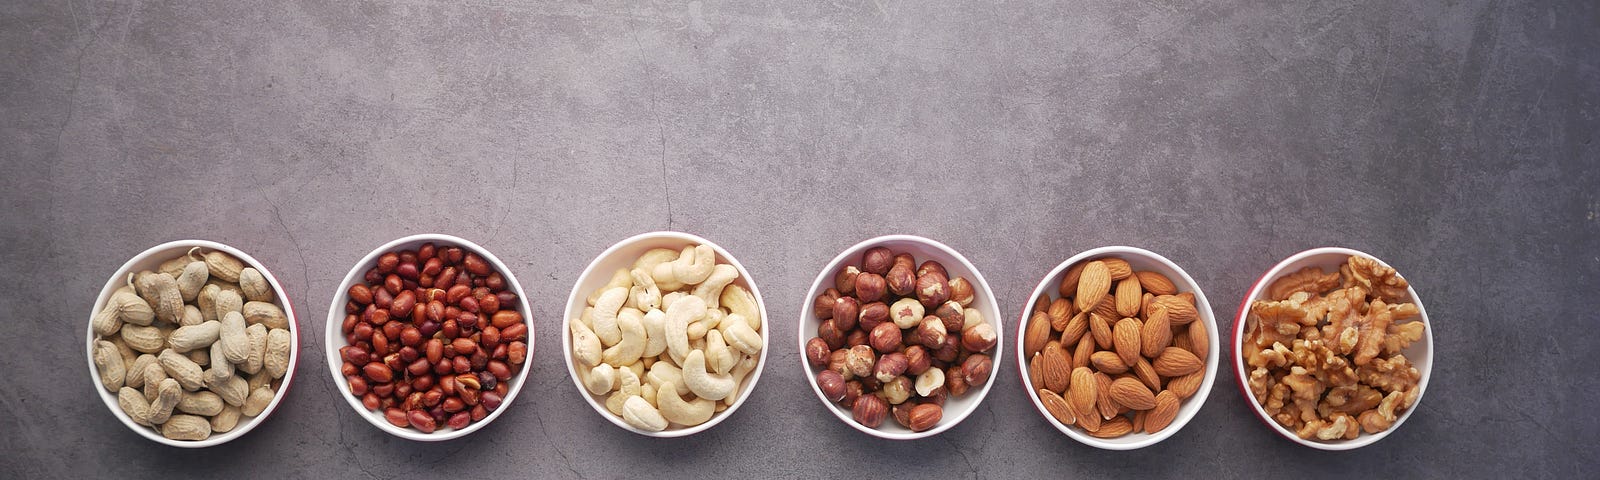 Six bowls of various nuts, lined up horizontally across the photograph. We have a bird’s eye view. The white bowls sit against  a gray background.